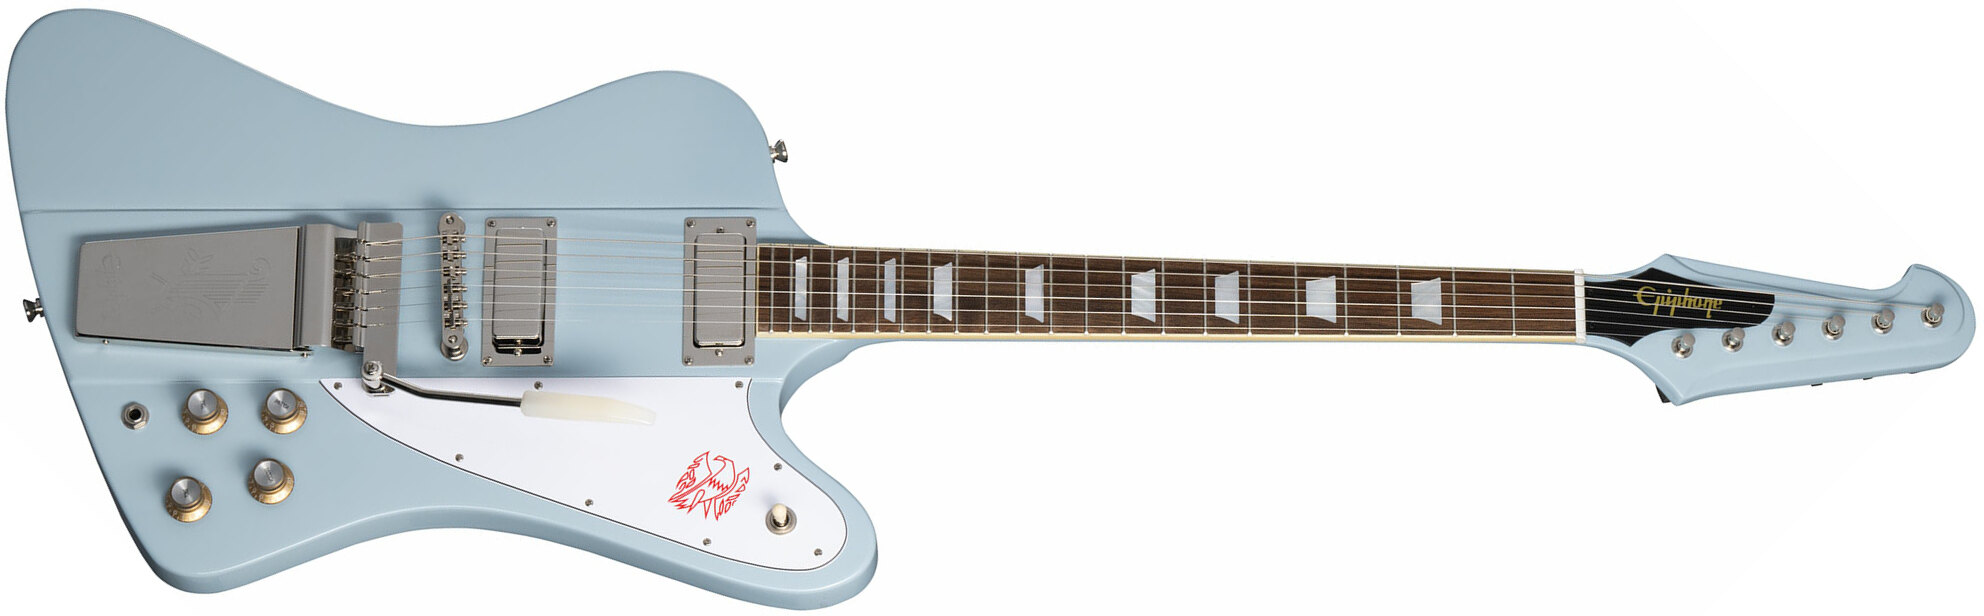 Epiphone Firebird V 1963 Maestro Vibrola Inspired By Gibson Custom 2mh Trem Lau - Frost Blue - Retro rock electric guitar - Main picture